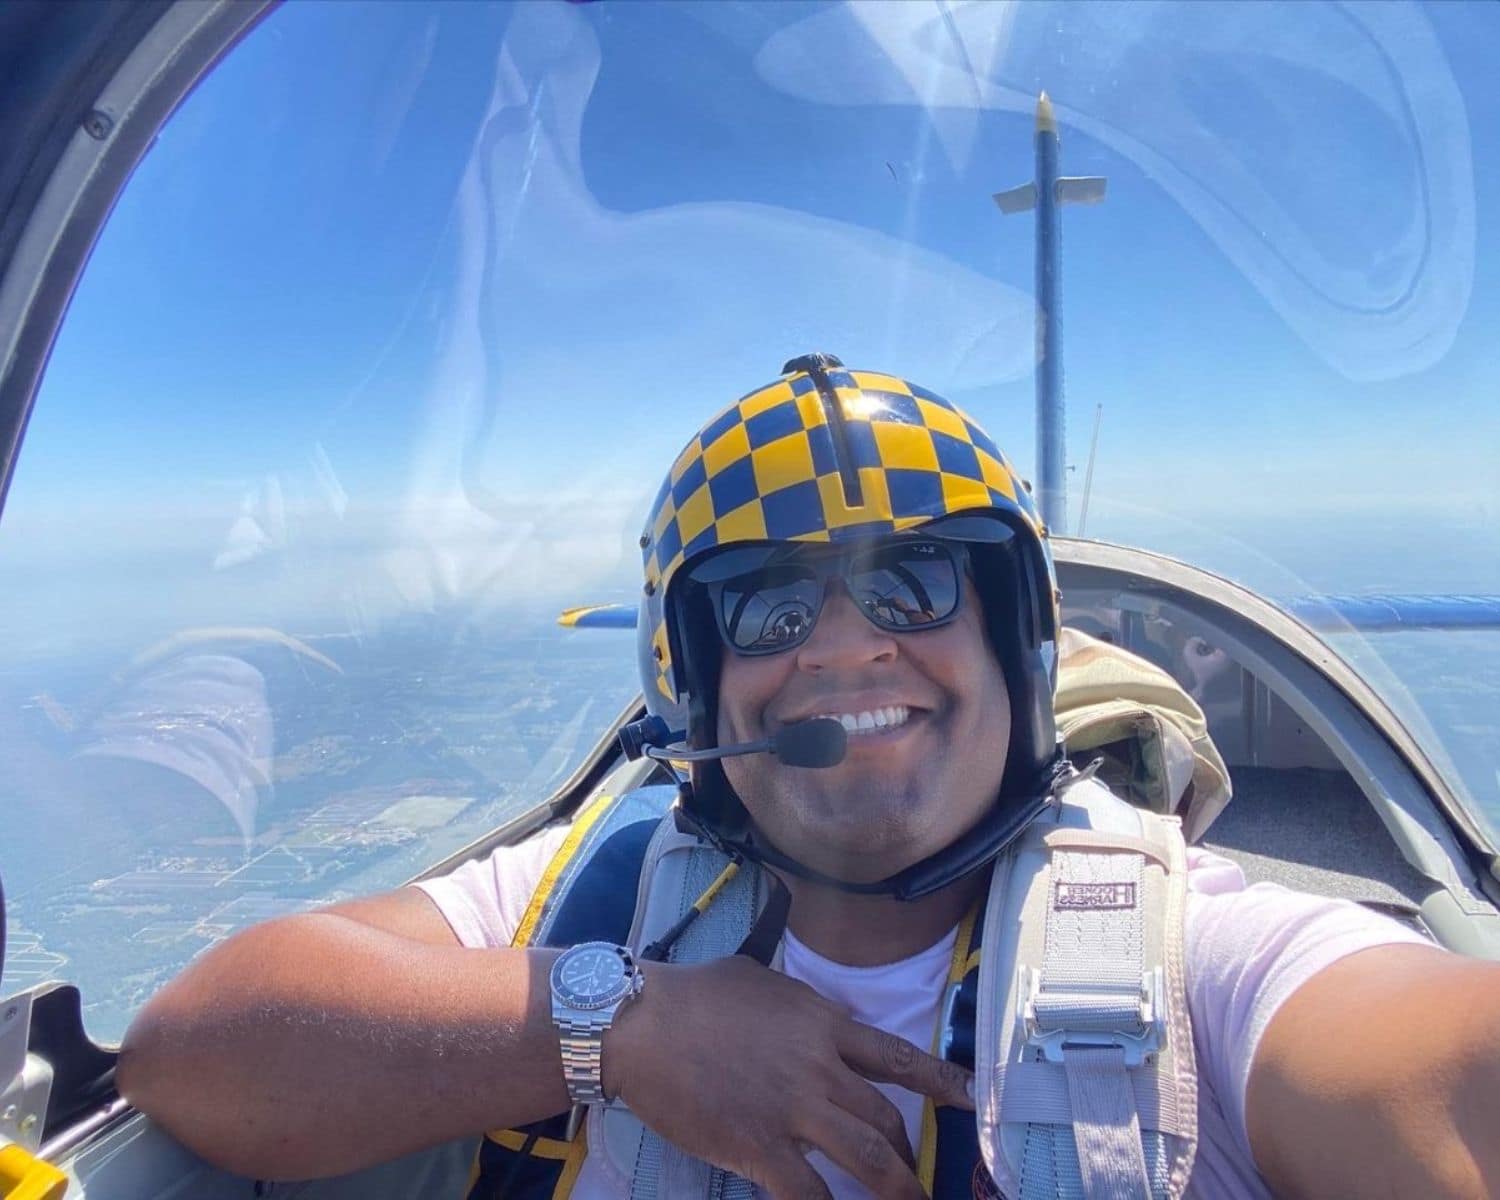 M.S. in Leadership student Nick Jacobs has a passion for flight and enjoys his time in the sky. (Photo: Nick Jacobs)